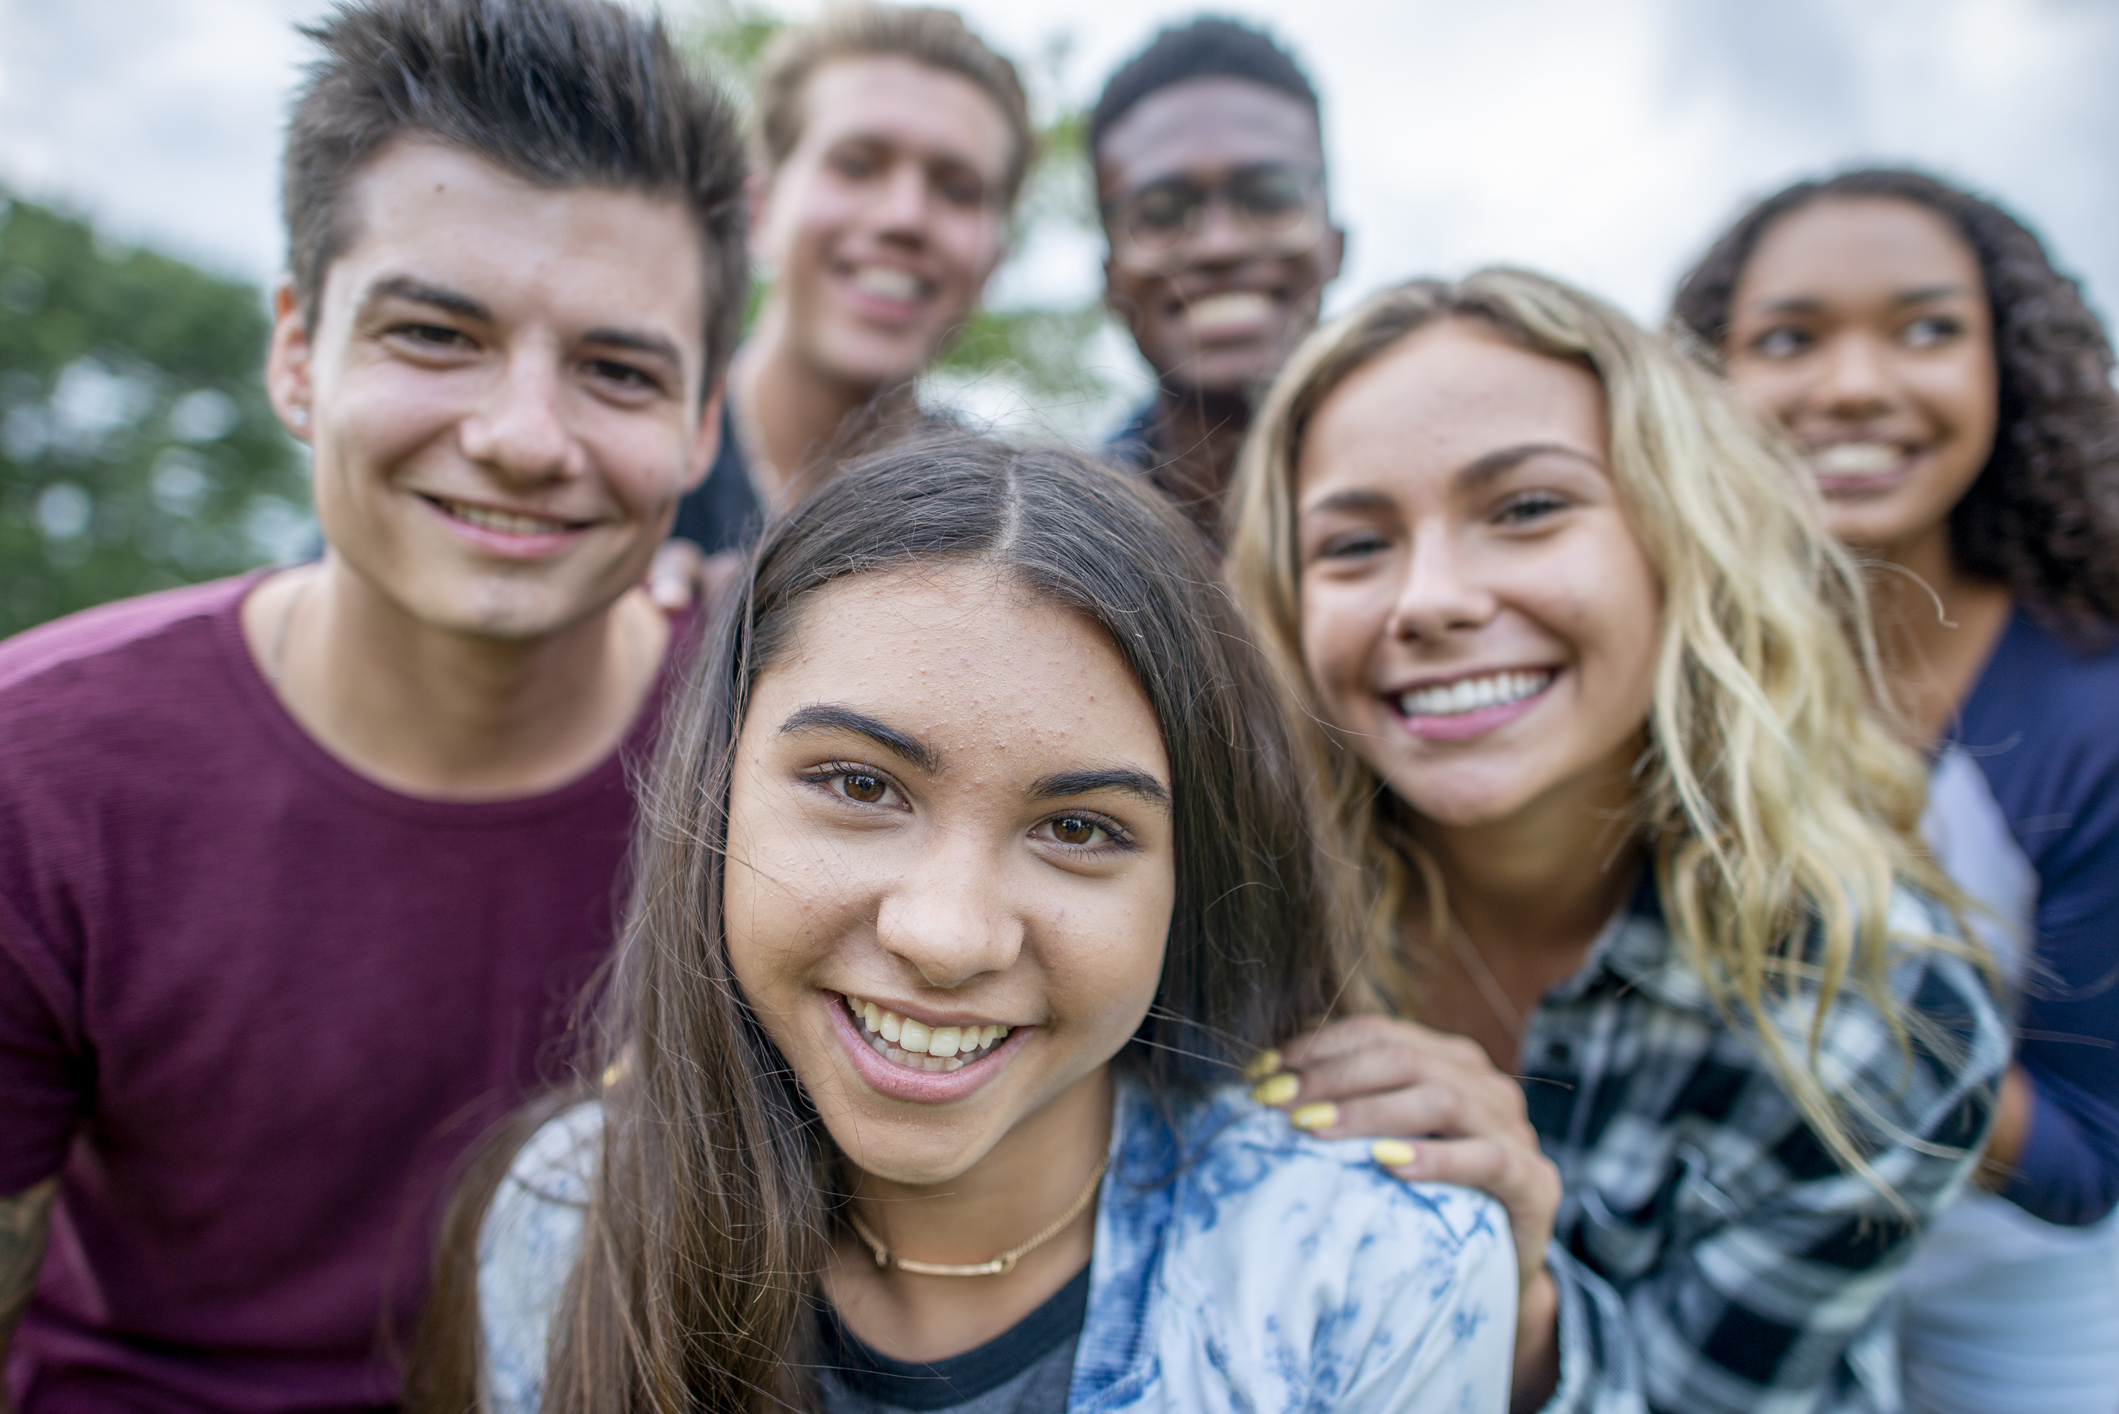 Group of five adolescents of different genders and complexions smiling for a selfie.